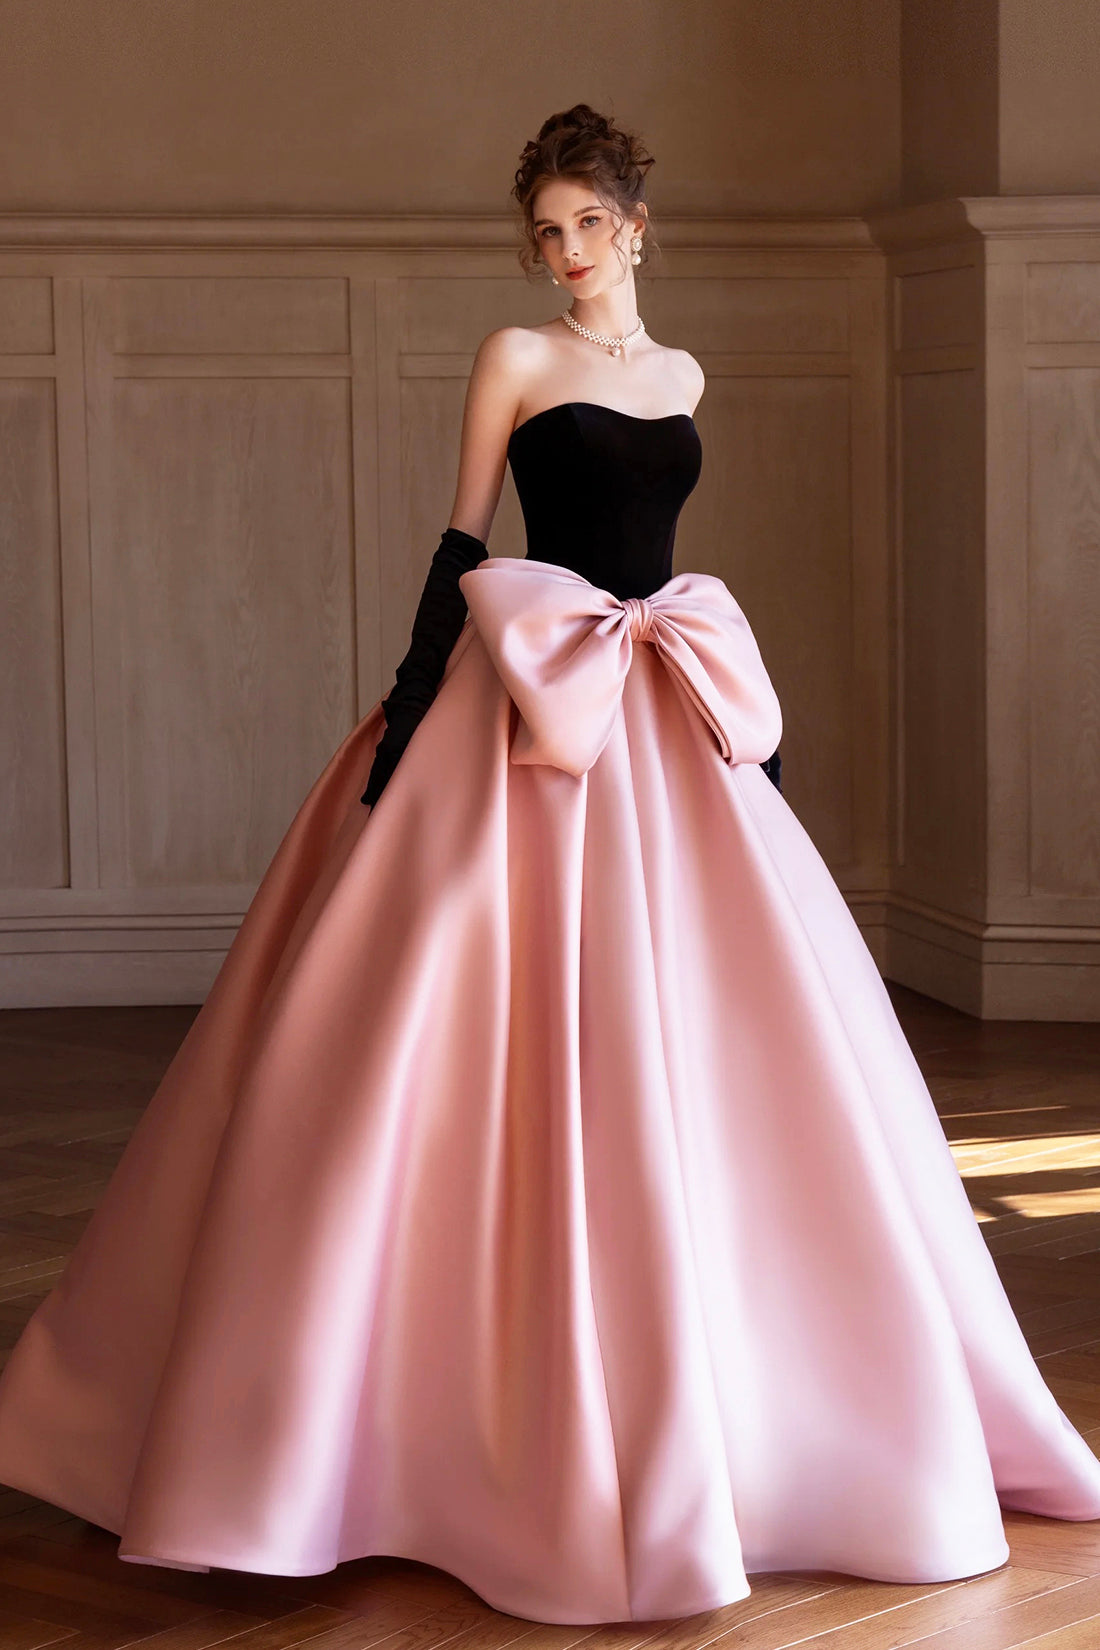 Black Velvet and Satin Long Formal Dress, Beautiful Strapless Evening Party Dress with Bow